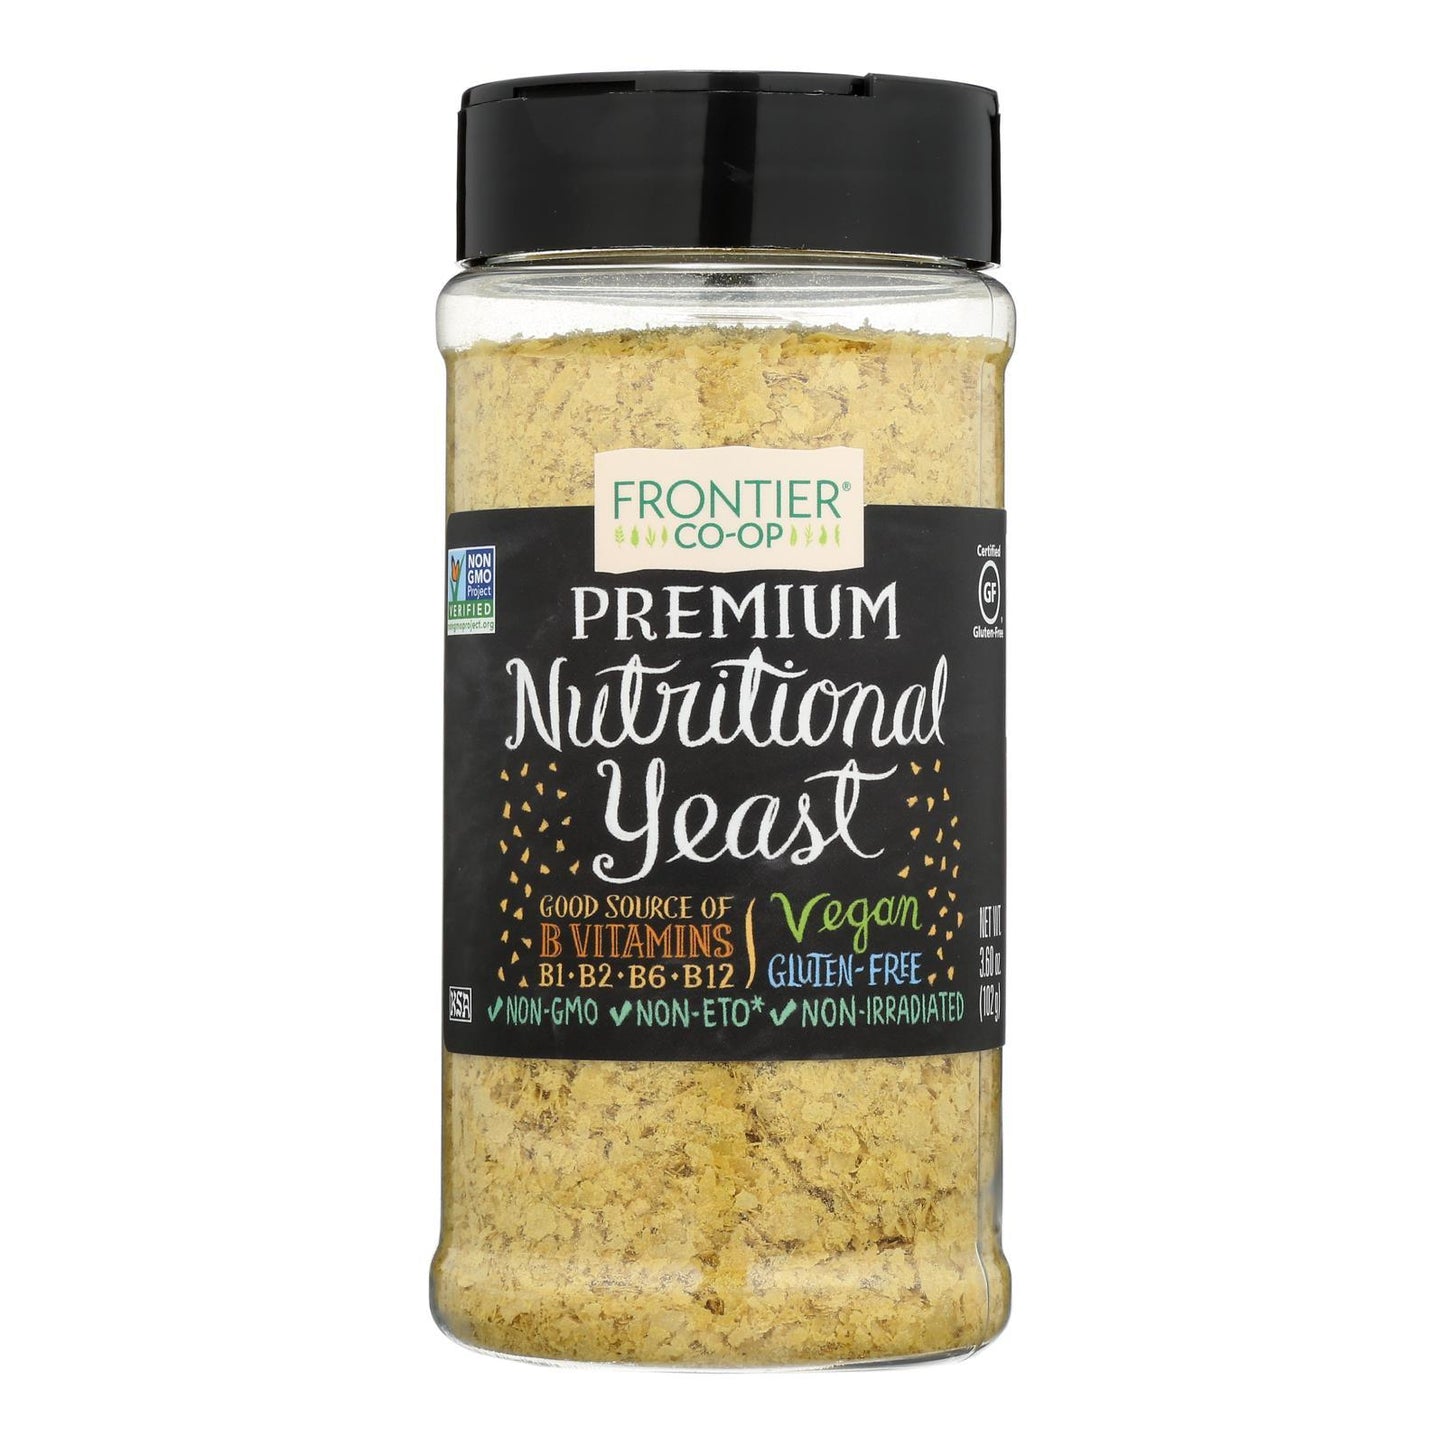 Frontier Natural Products Coop - Yeast Premium Nutritional - 1 Each-3.6 Oz